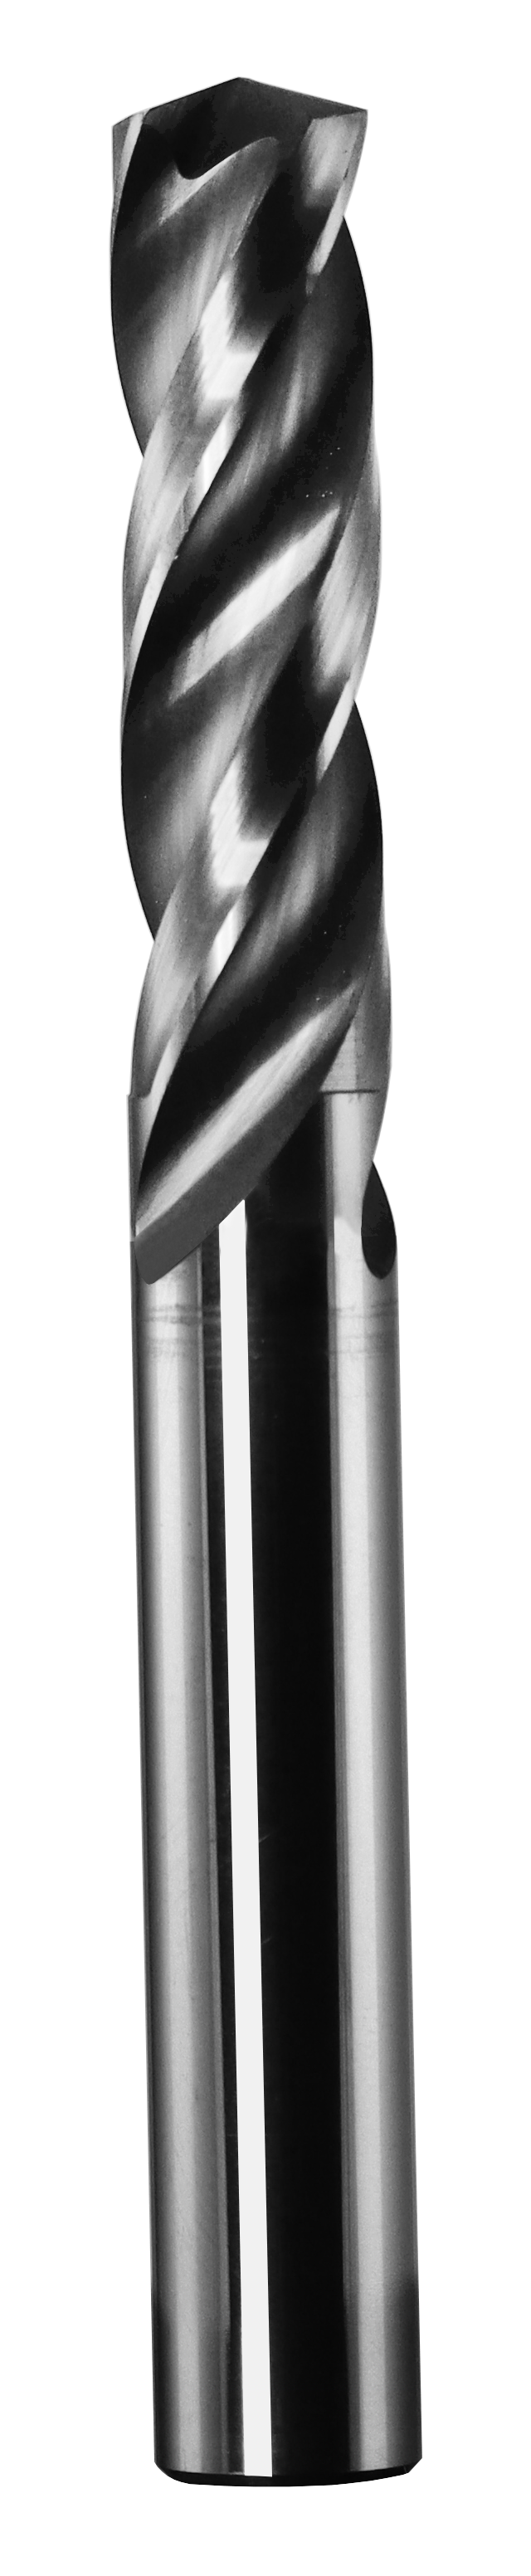 8.20mm Dia, 150 Degree Point, Solid Carbide Drill - 63018